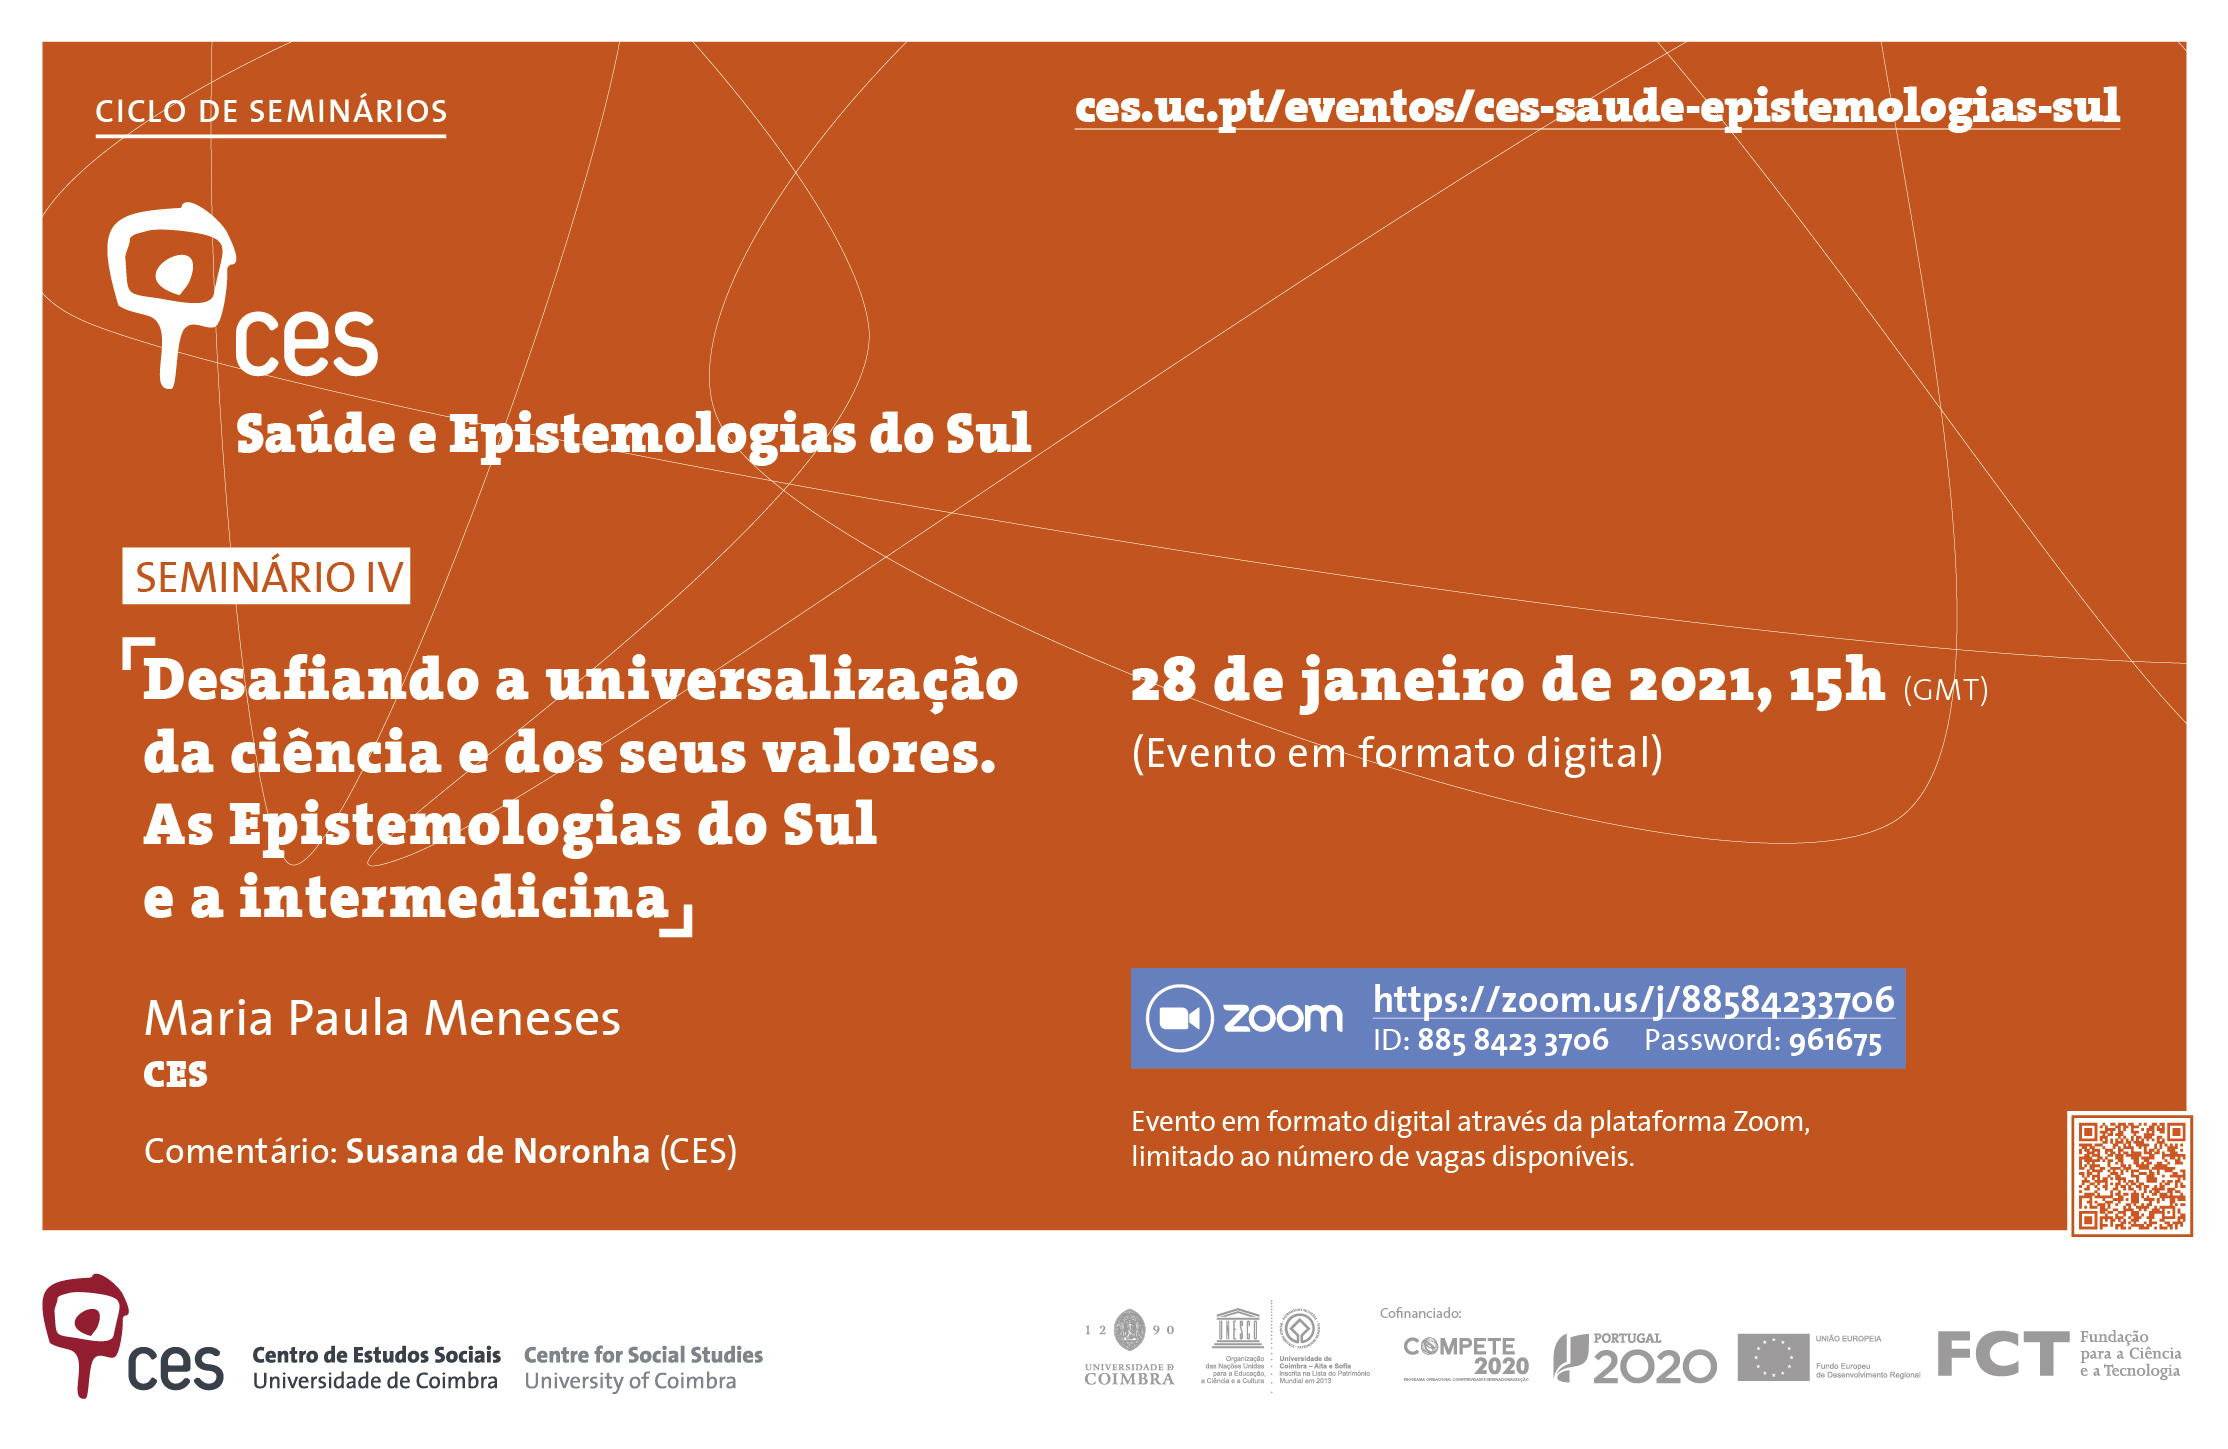 Challenging the universalisation of science and its values. Epistemologies of the South and intermedicine<span id="edit_32186"><script>$(function() { $('#edit_32186').load( "/myces/user/editobj.php?tipo=evento&id=32186" ); });</script></span>